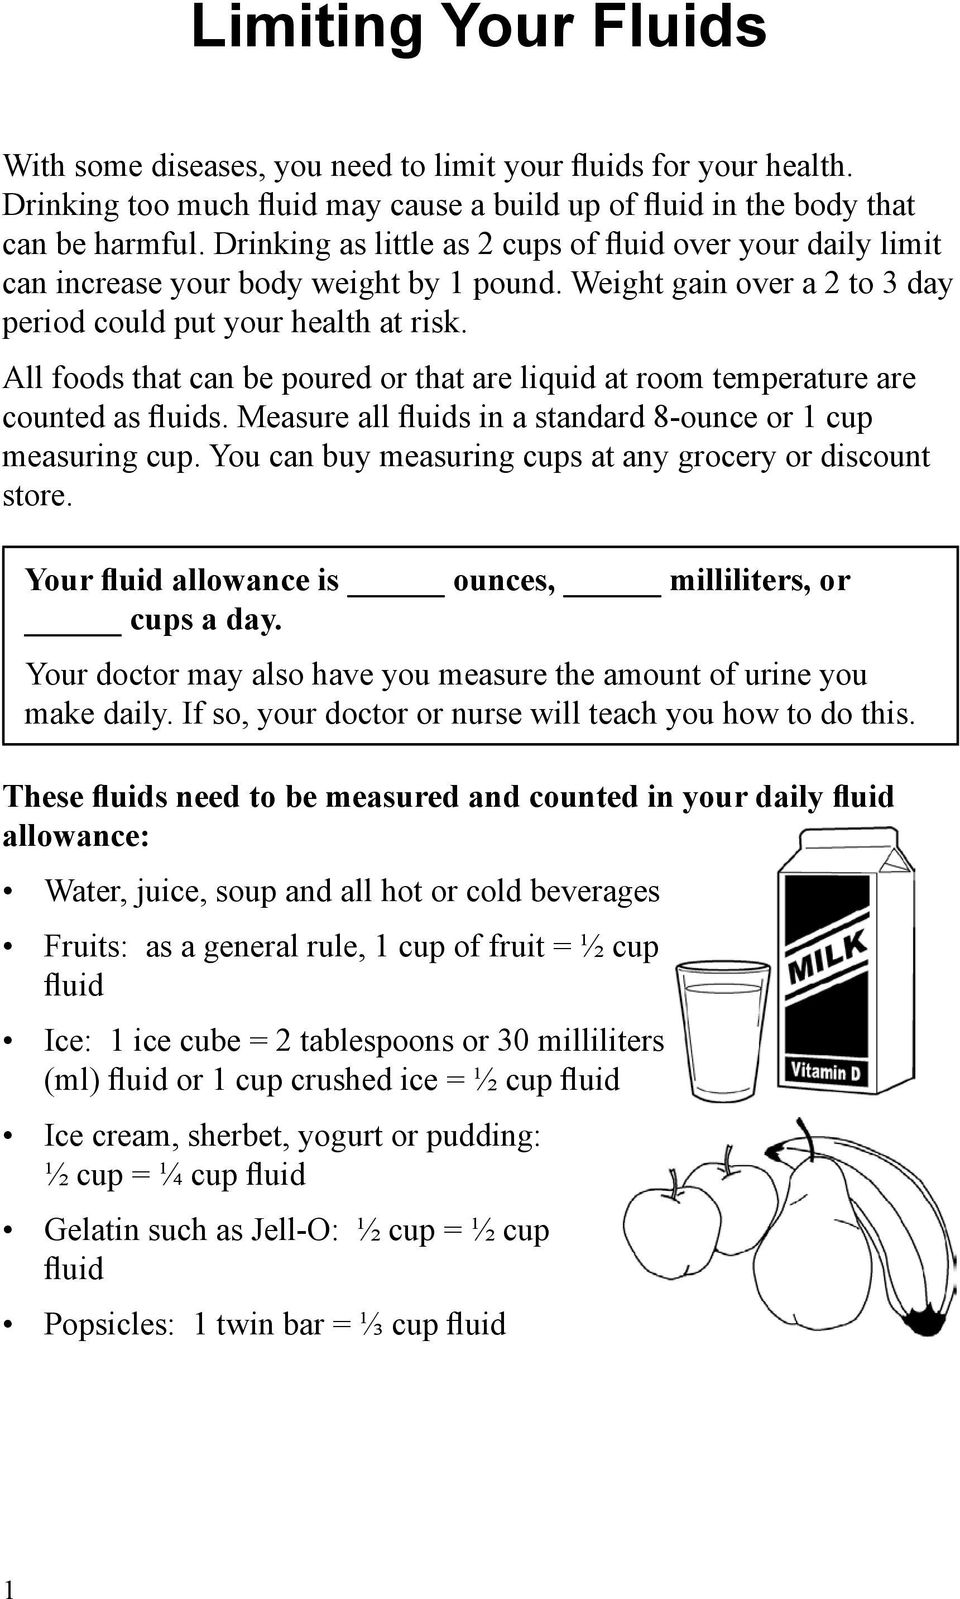 All foods that can be poured or that are liquid at room temperature are counted as fluids. Measure all fluids in a standard 8-ounce or 1 cup measuring cup.